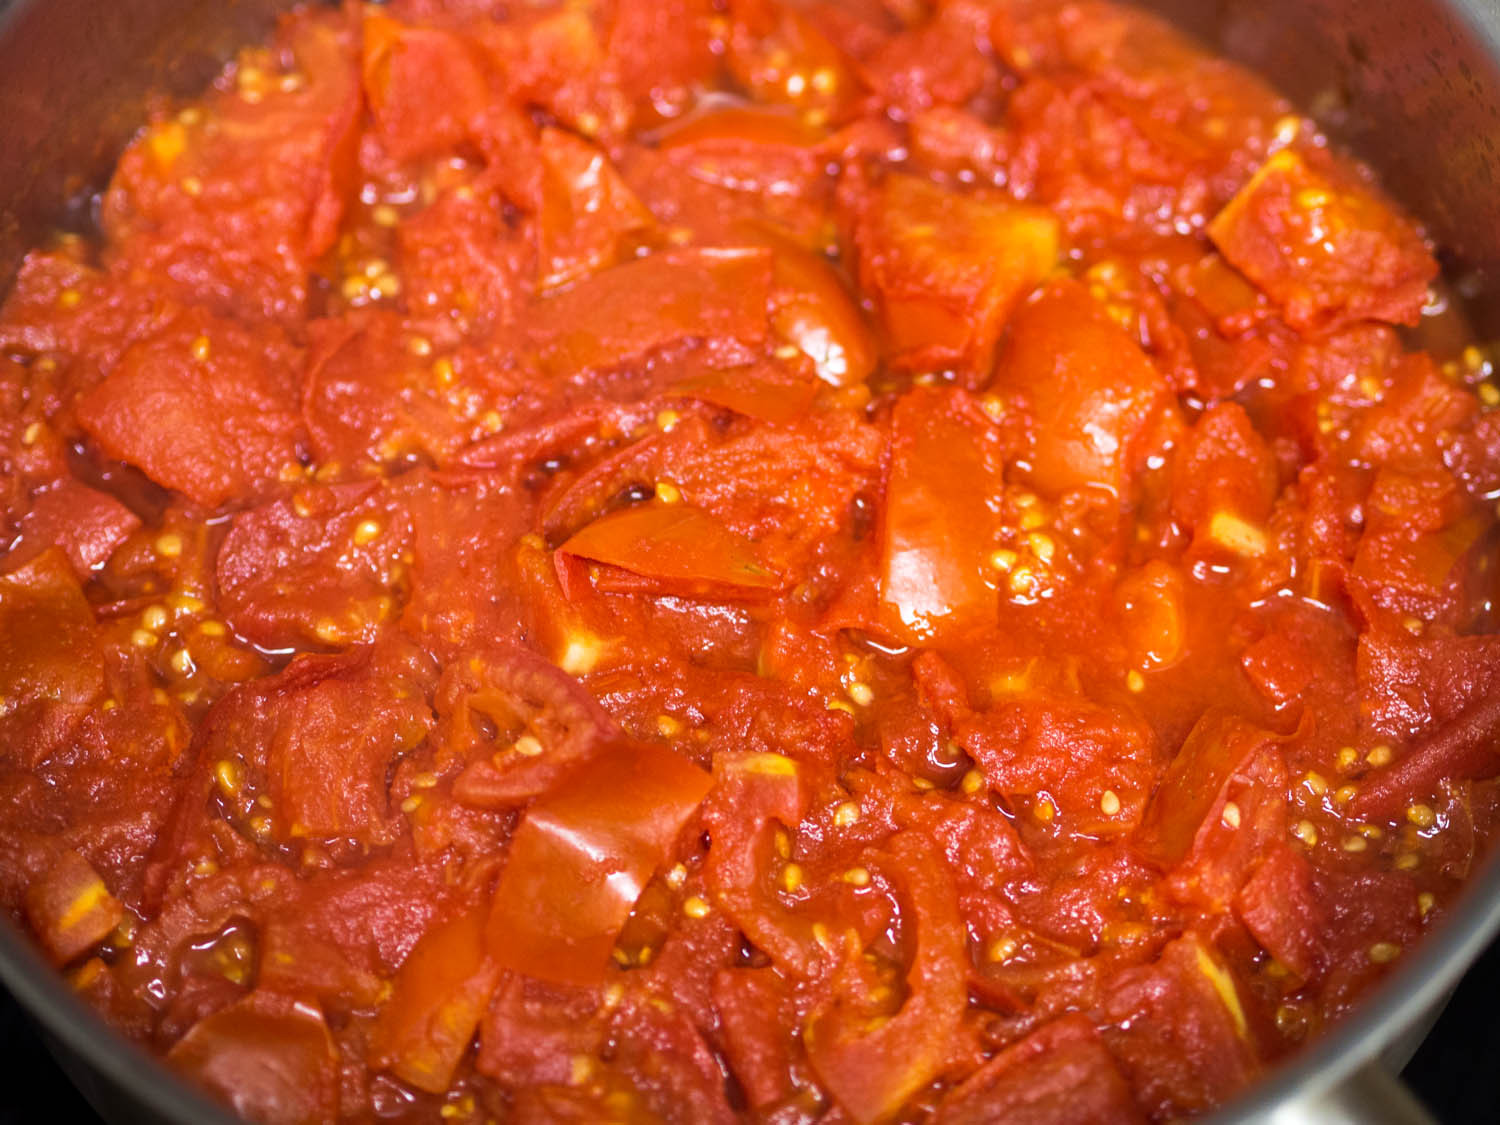 Spaghetti Sauce From Fresh Tomatoes
 How to Make the Best Tomato Sauce From Fresh Tomatoes